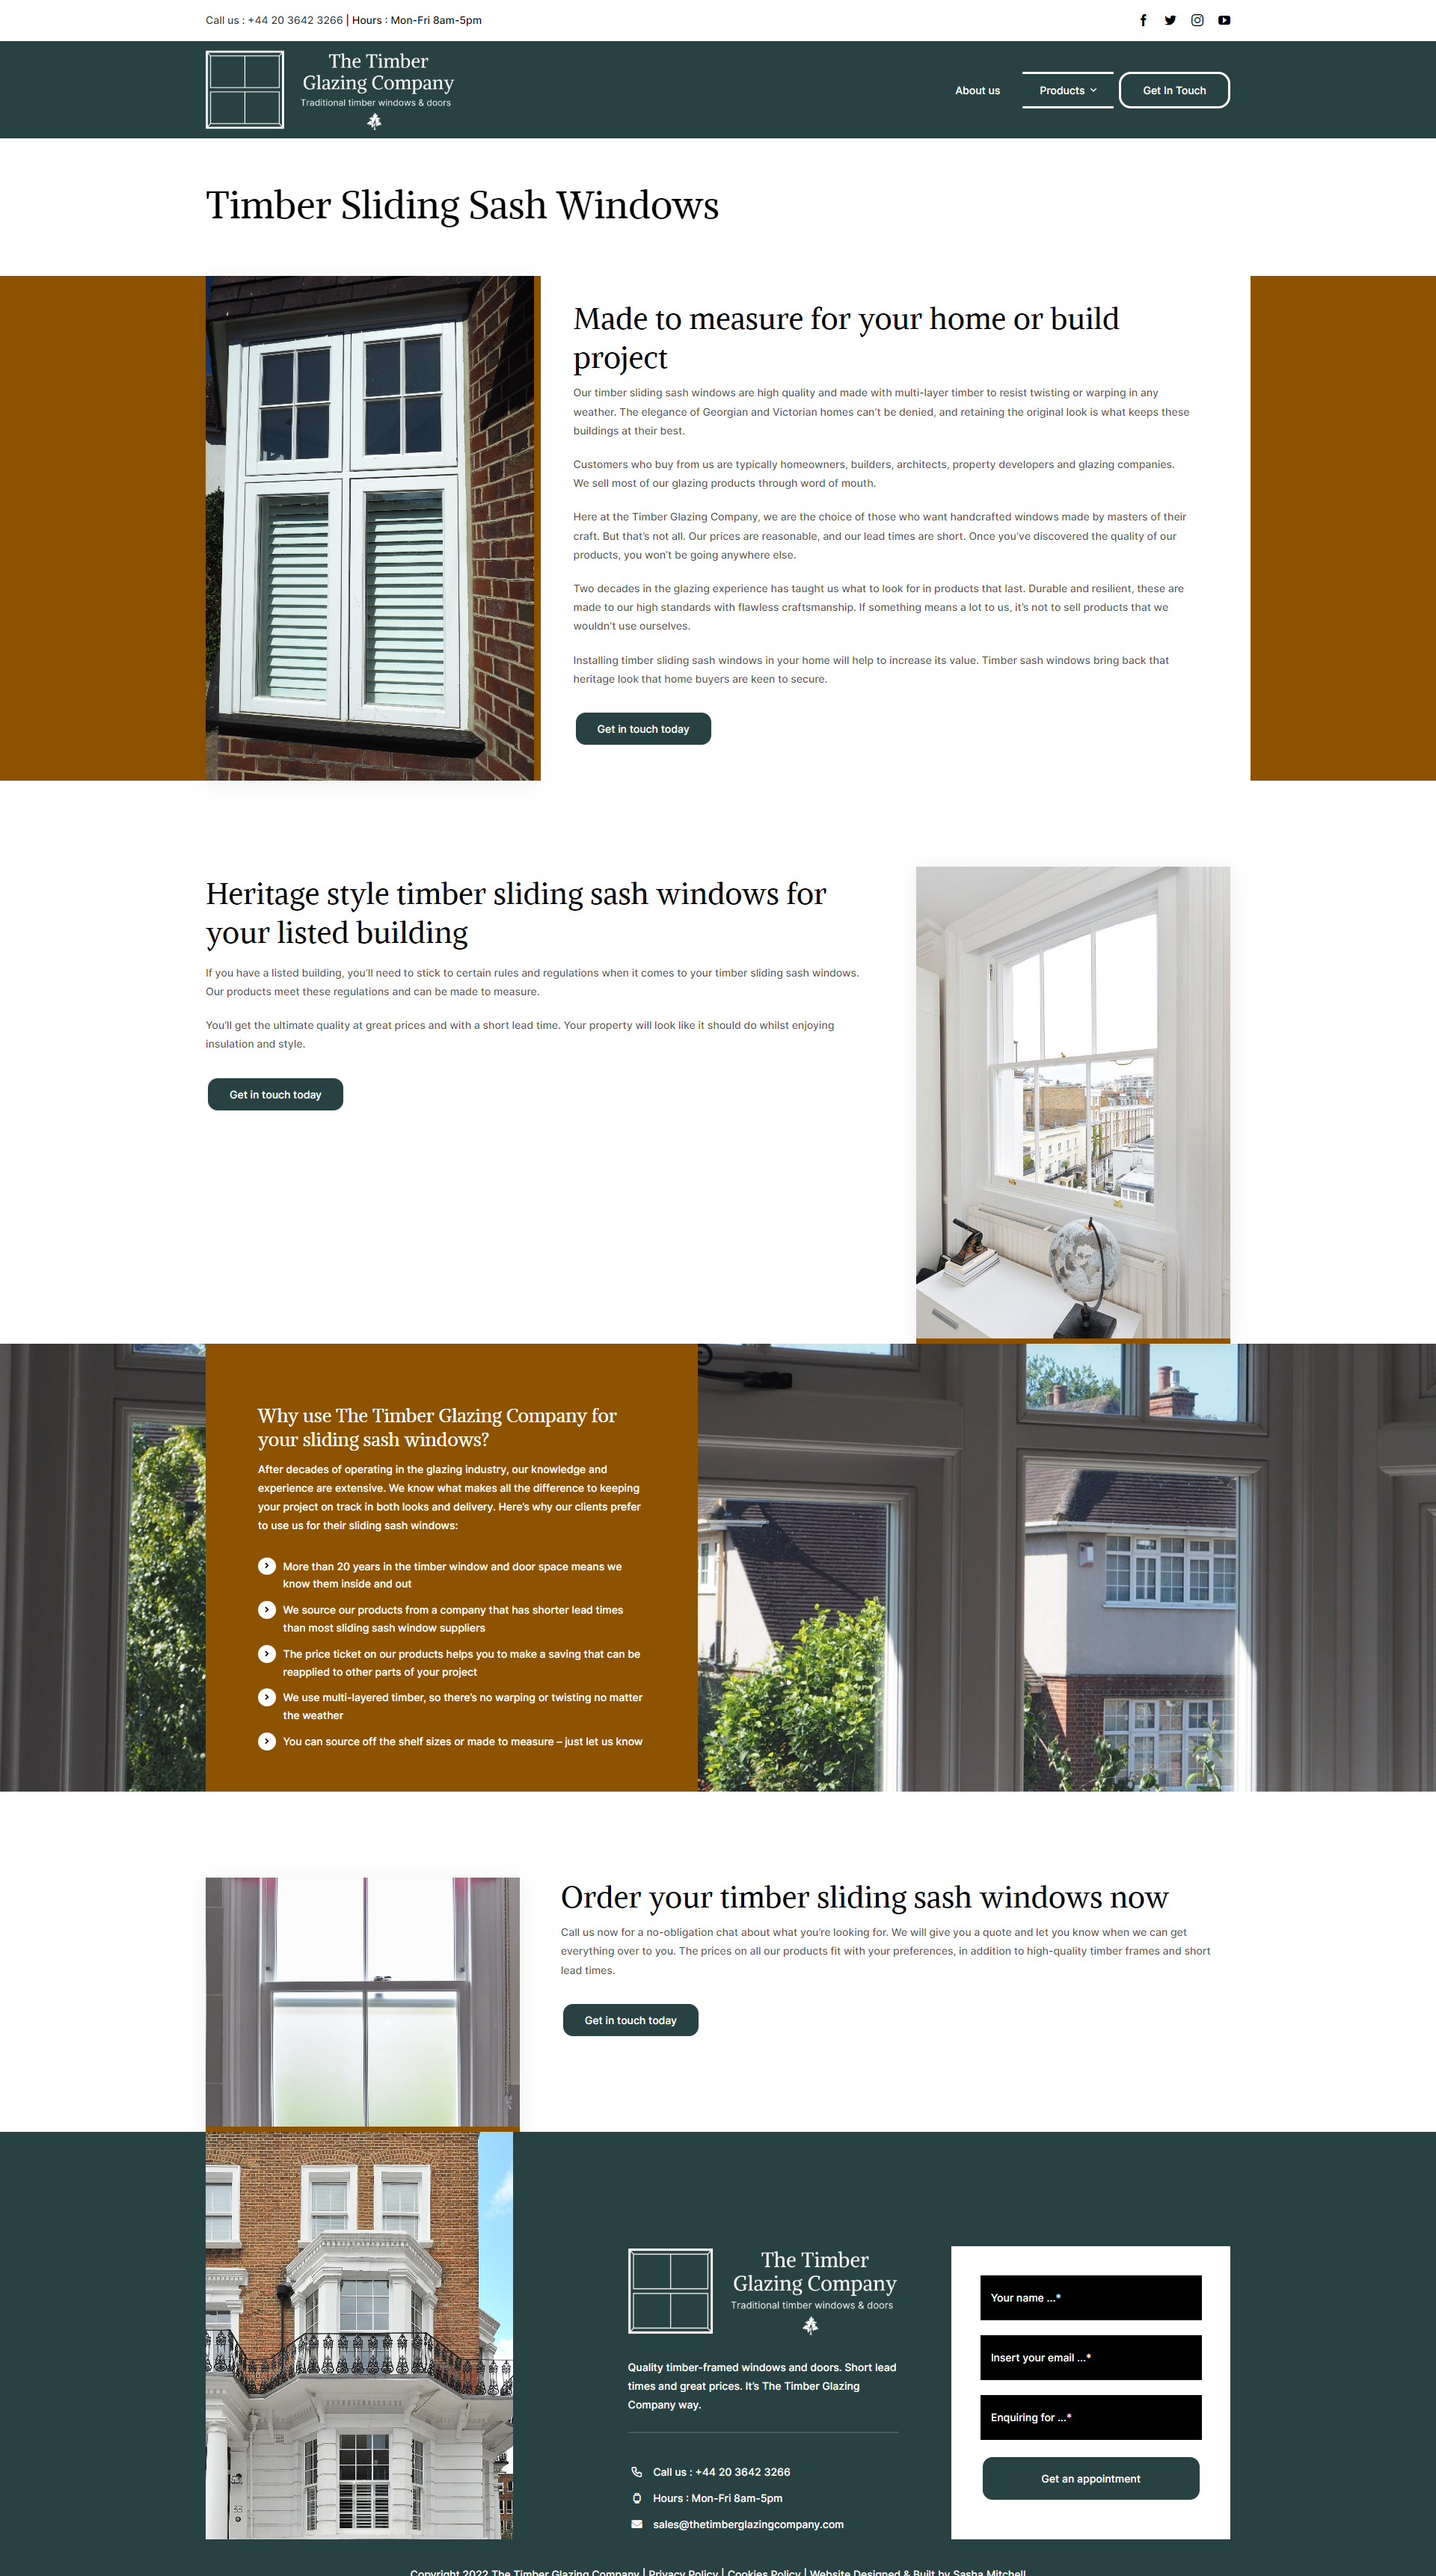 The Timber Glazing Company Case Study Product